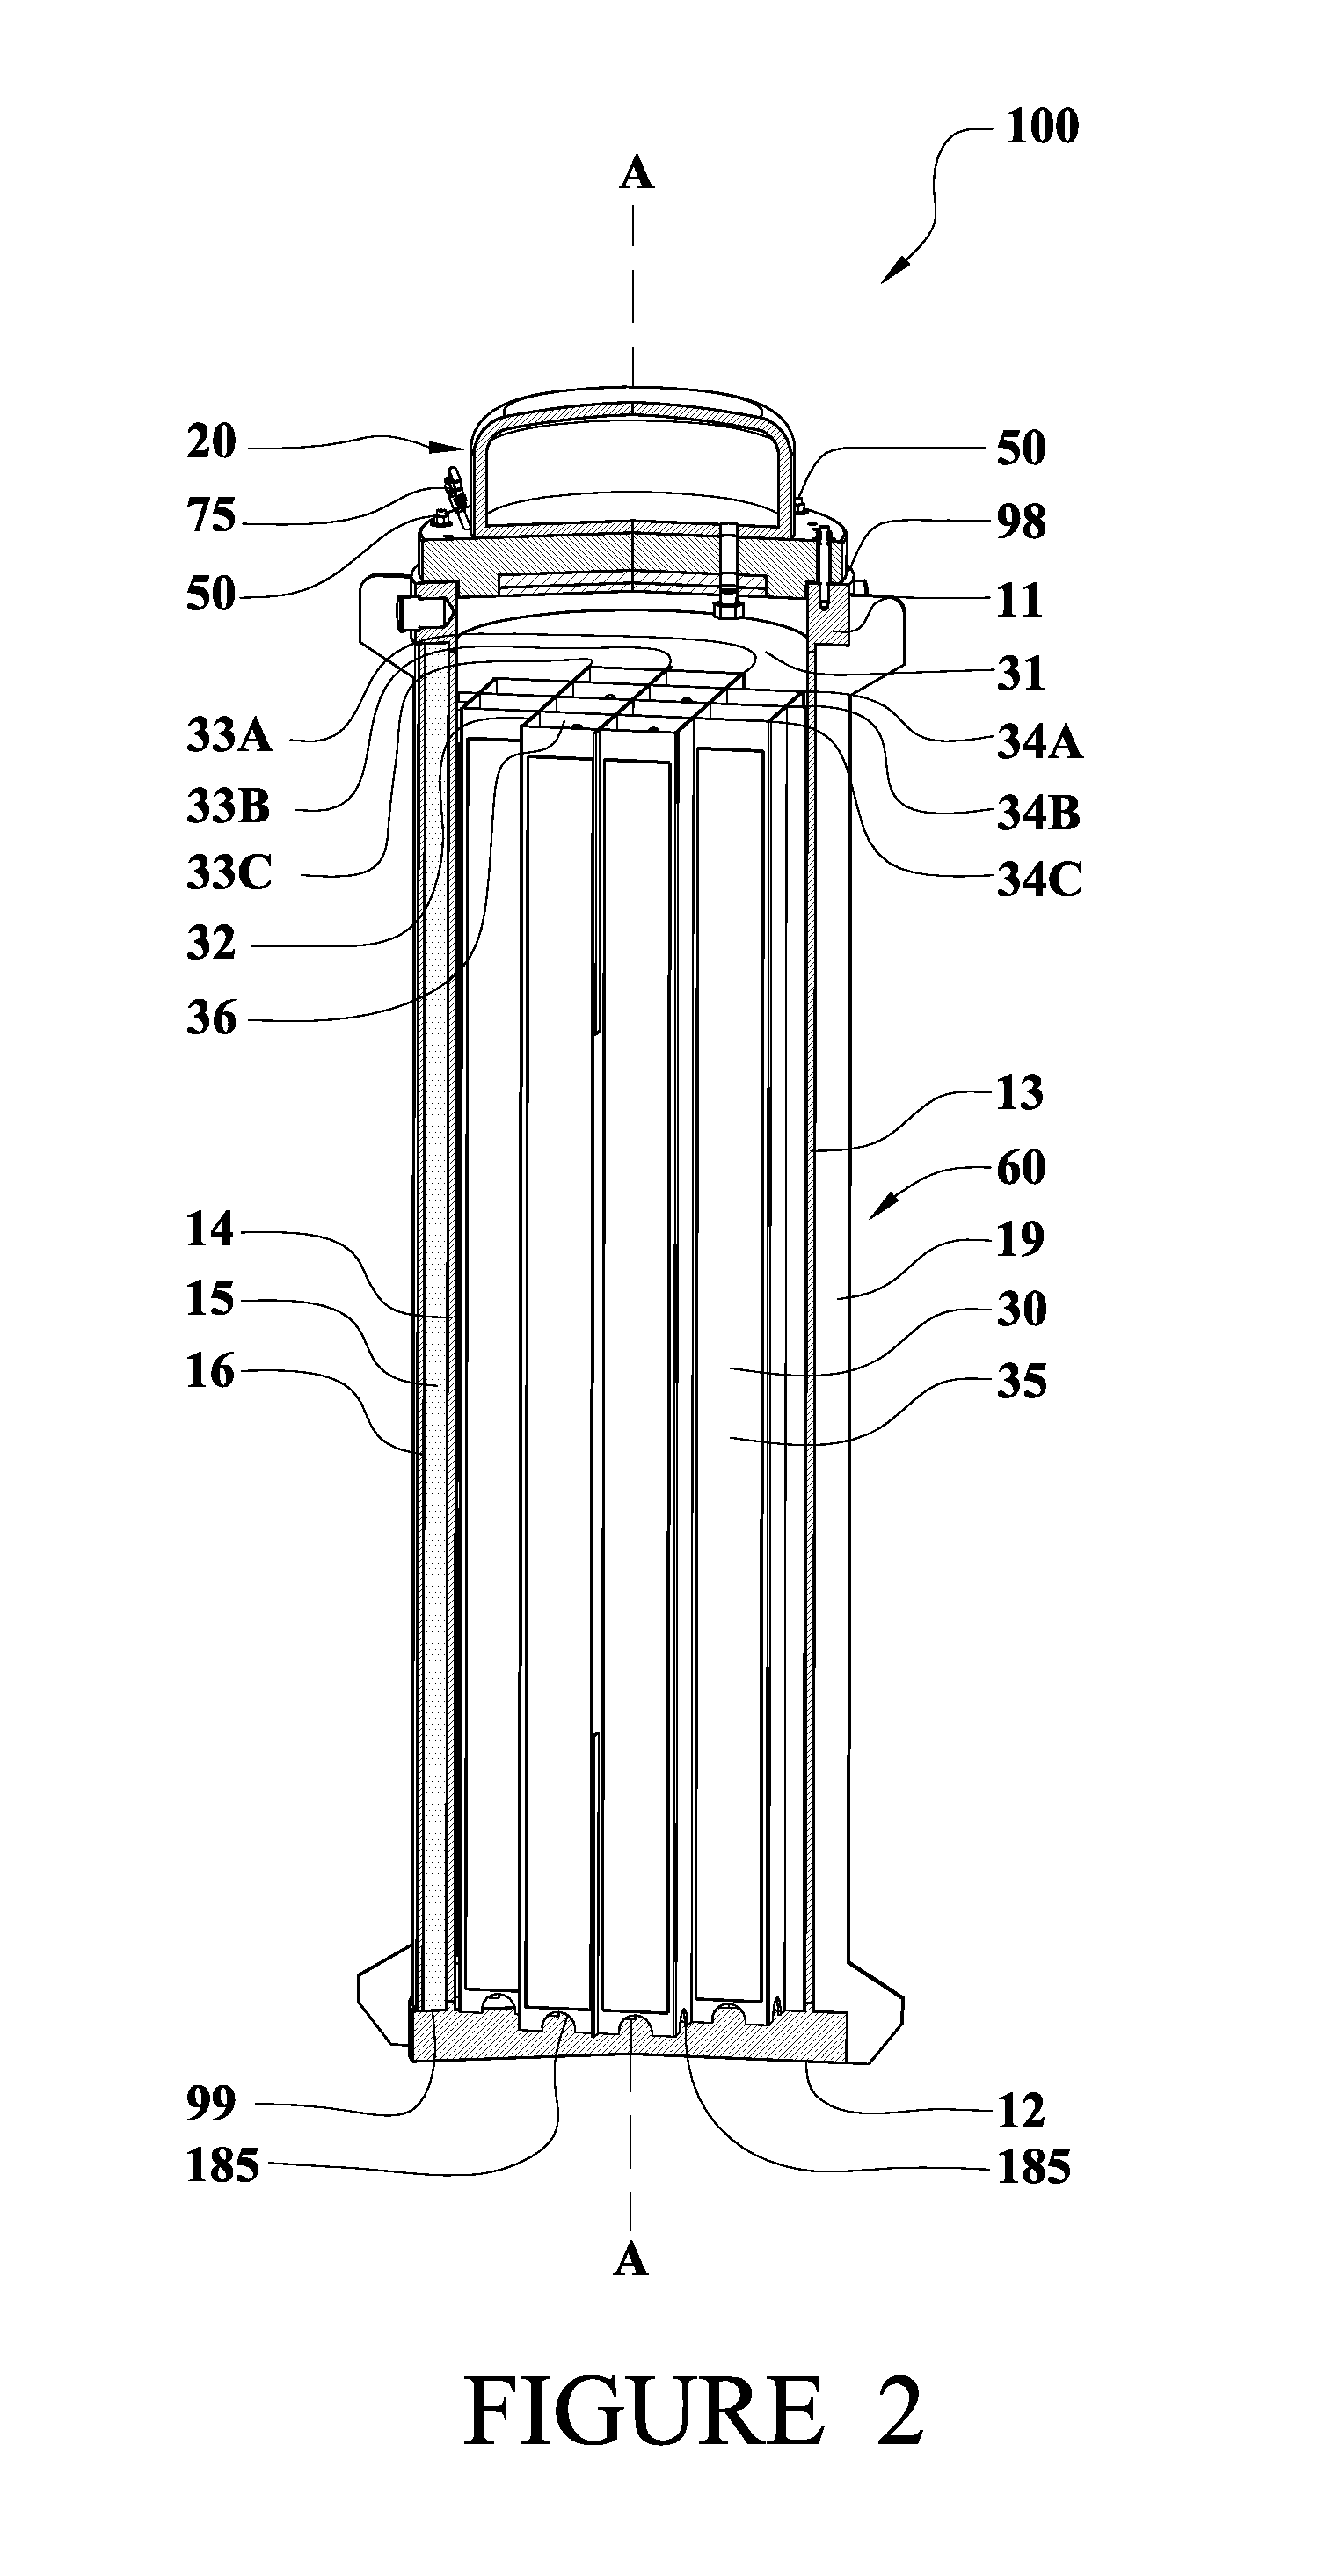 Method of transferring high level radionactive materials, and system for the same